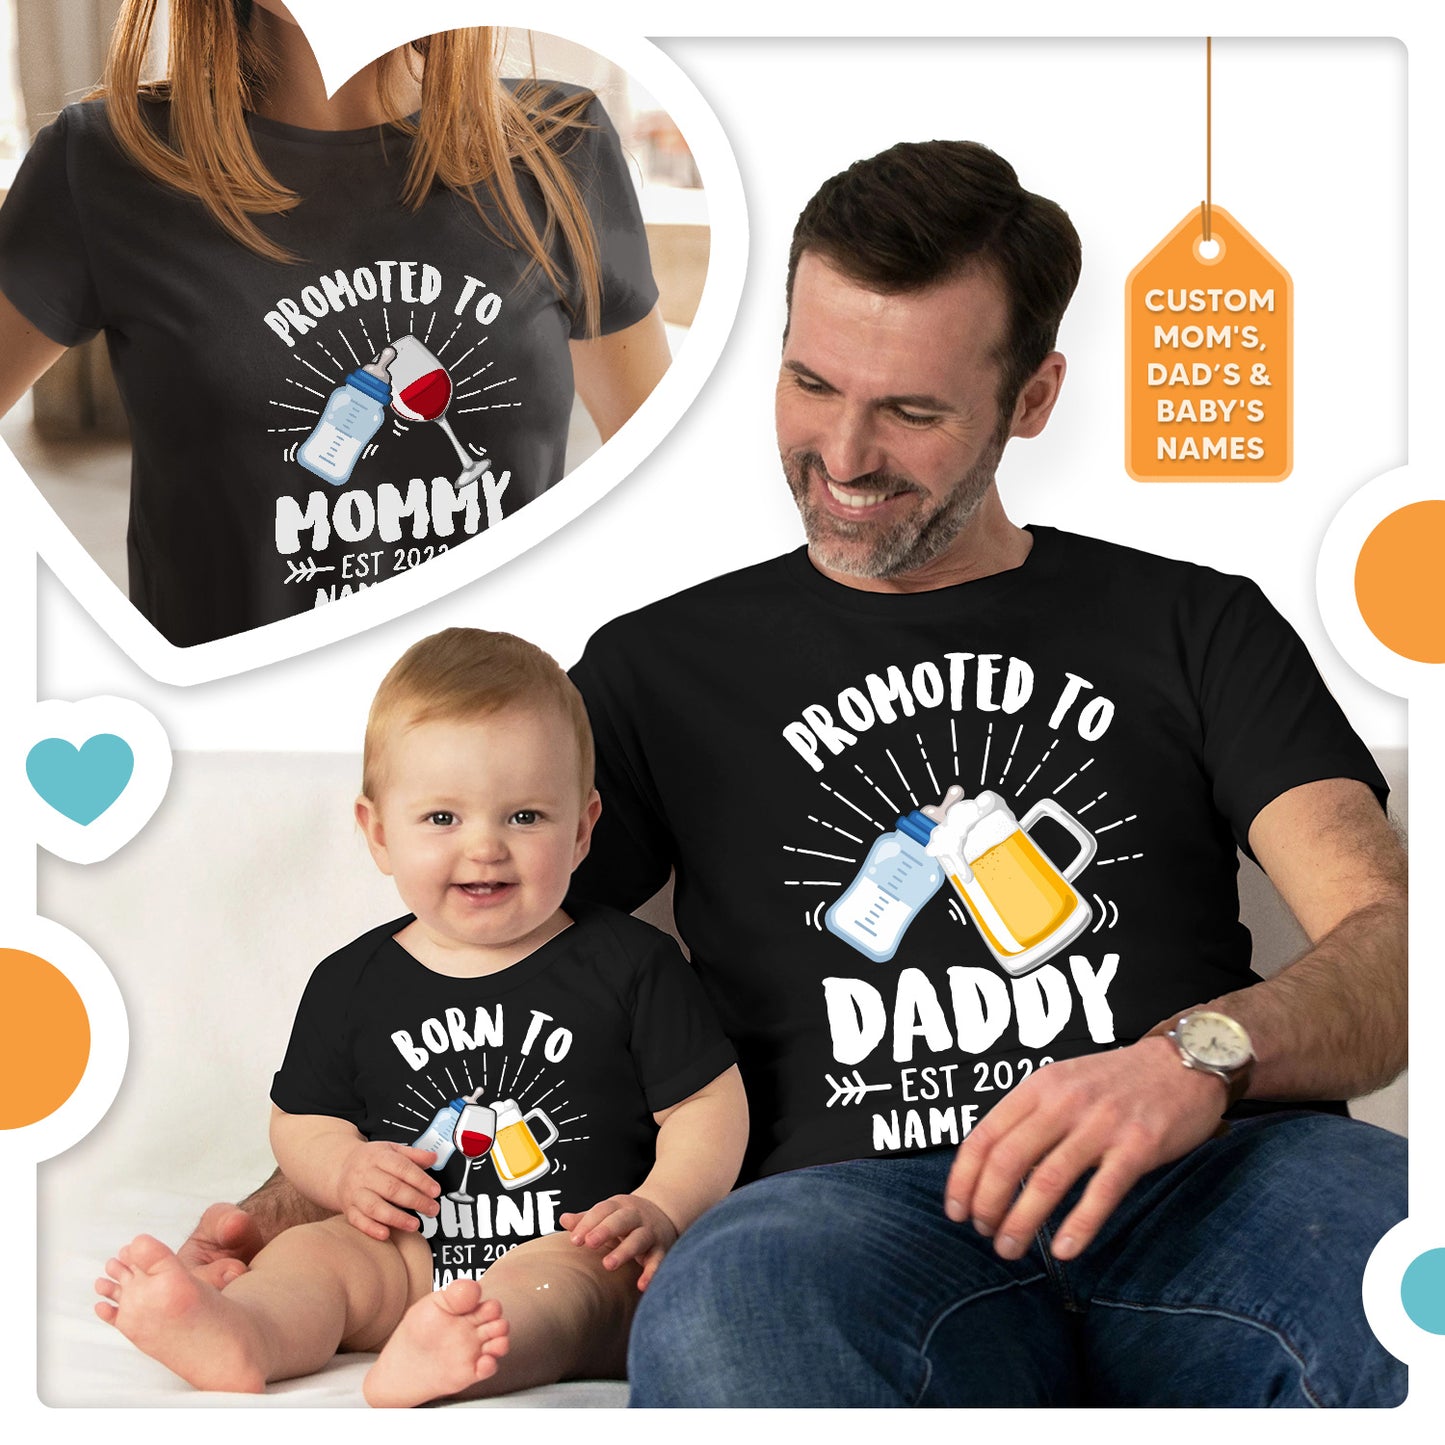 Drink Beer Wine Milk New Parents And Baby Matching Family Shirts Set